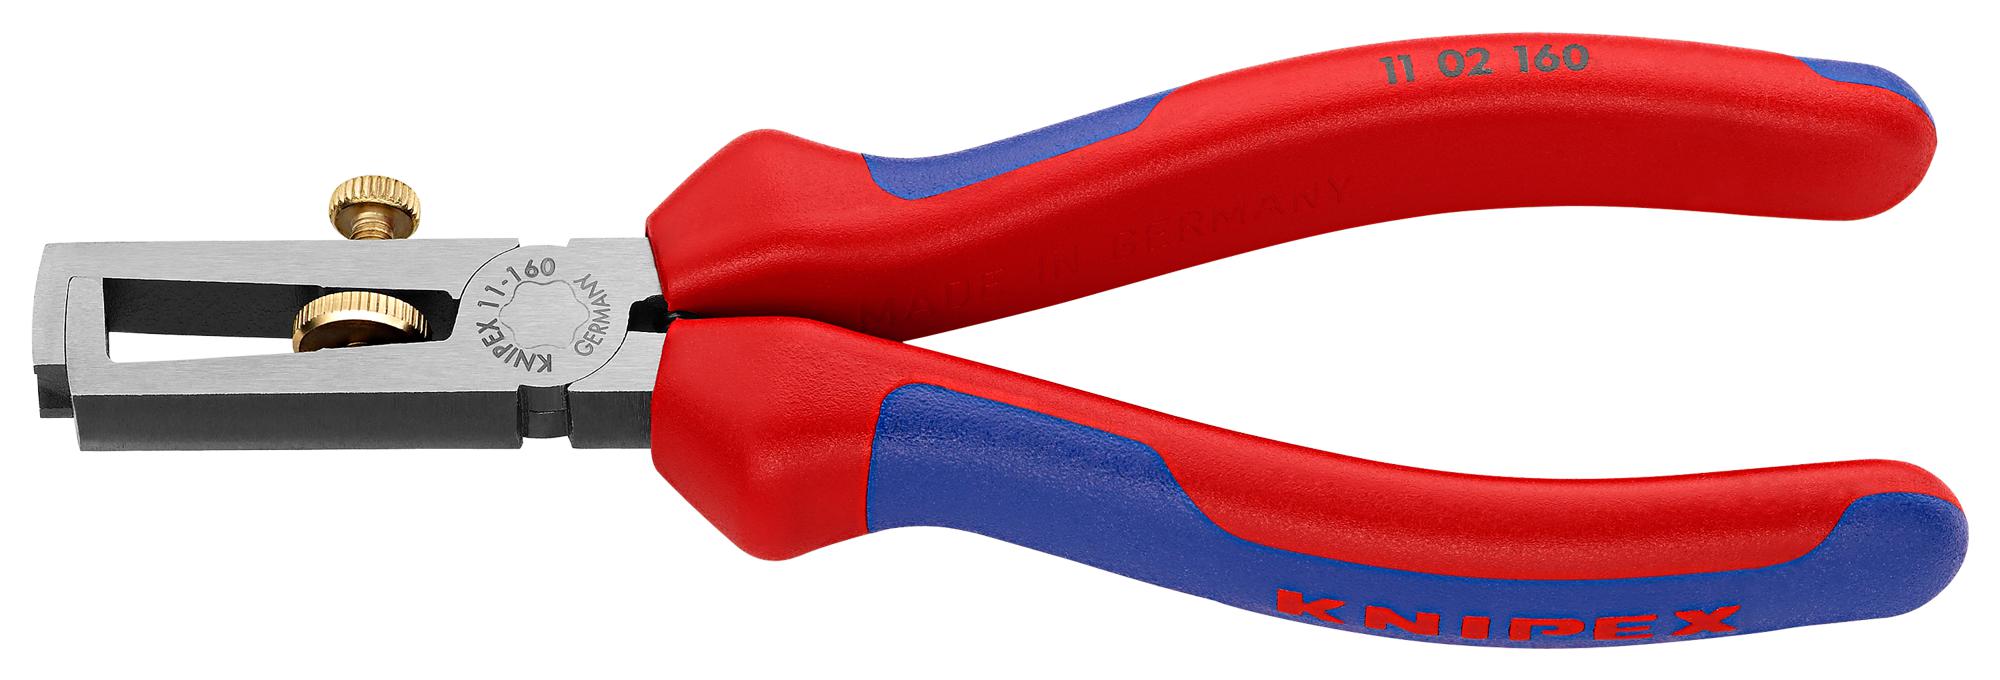 11 02 160 CABLE STRIPPER KNIPEX